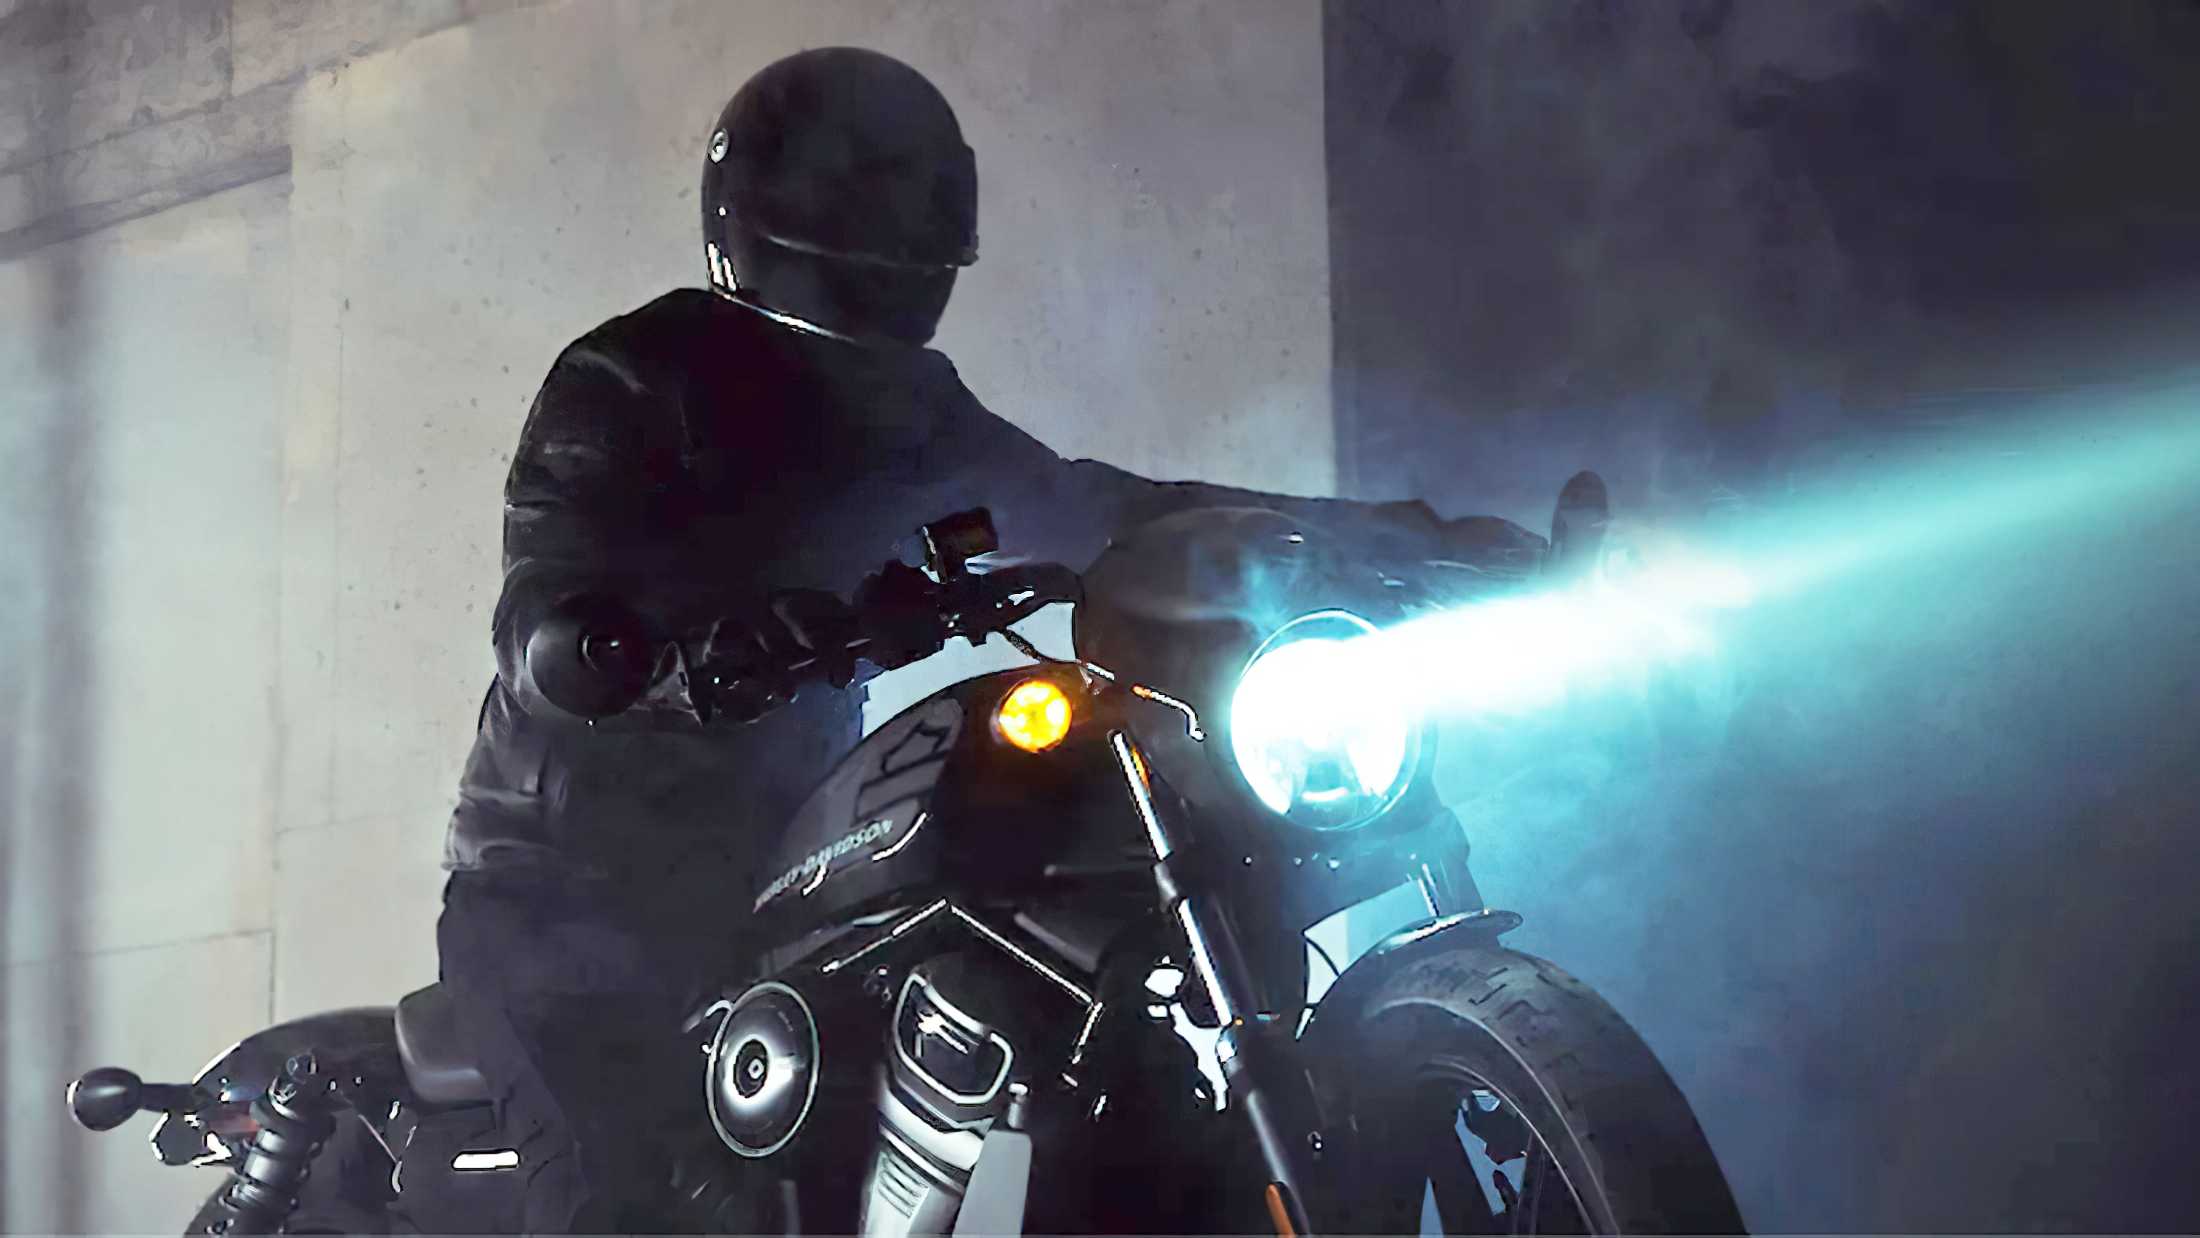 Presentation of new Harley Sportster on April 12, 2022
- also in the MOTORCYCLES.NEWS APP